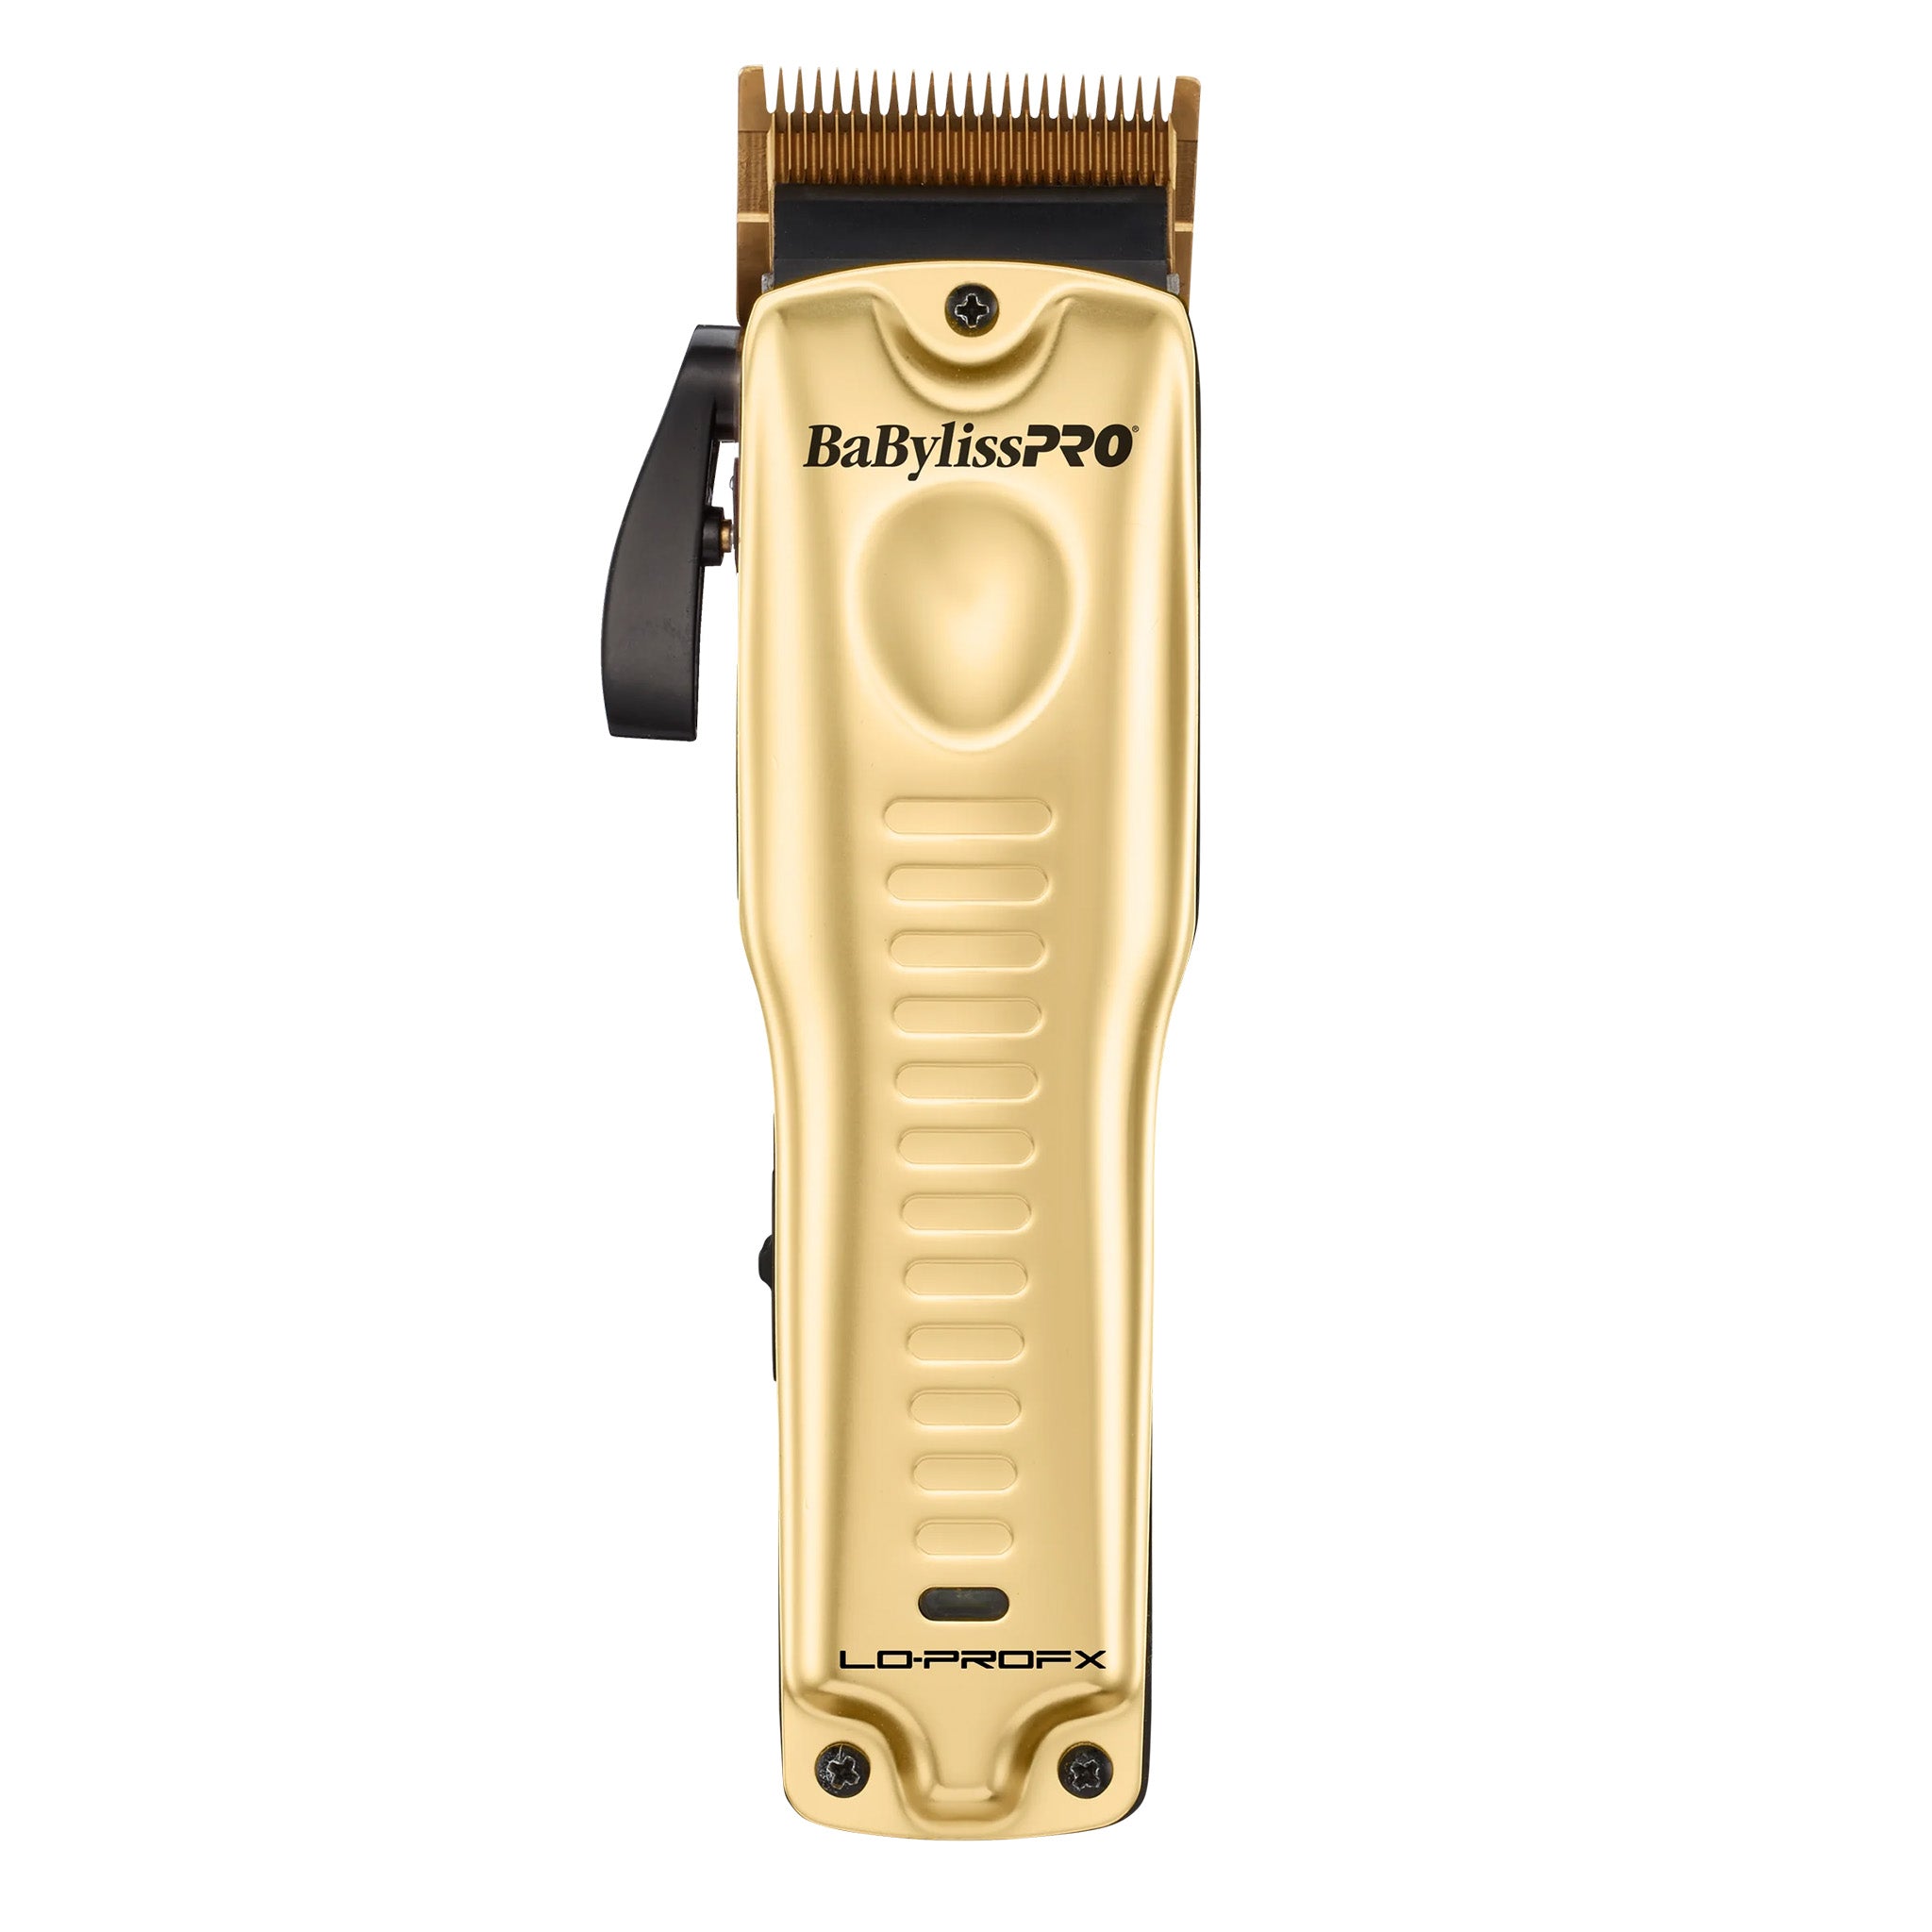 BabylissPRO LoPROFX Lithium Clipper Gold